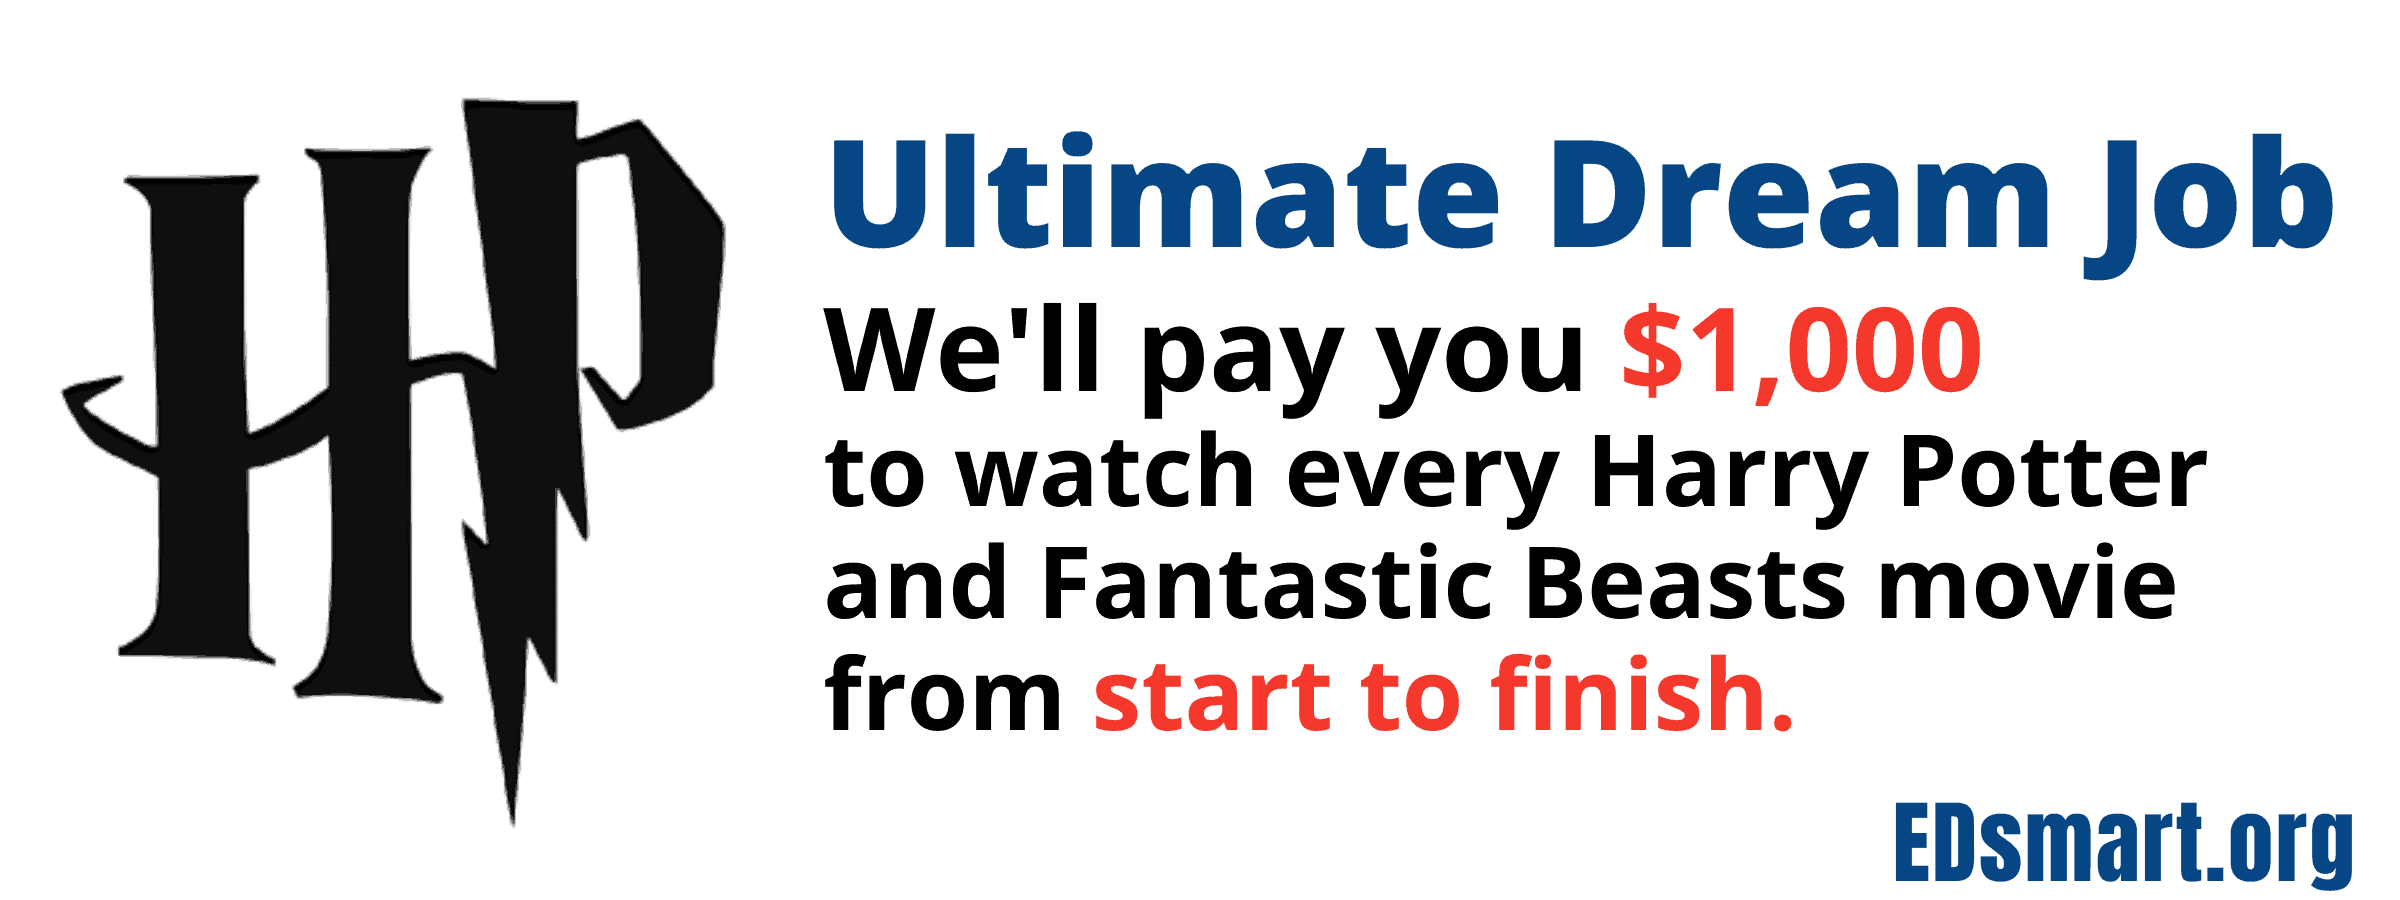 watch harry potter and fantastic beasts - win $1000